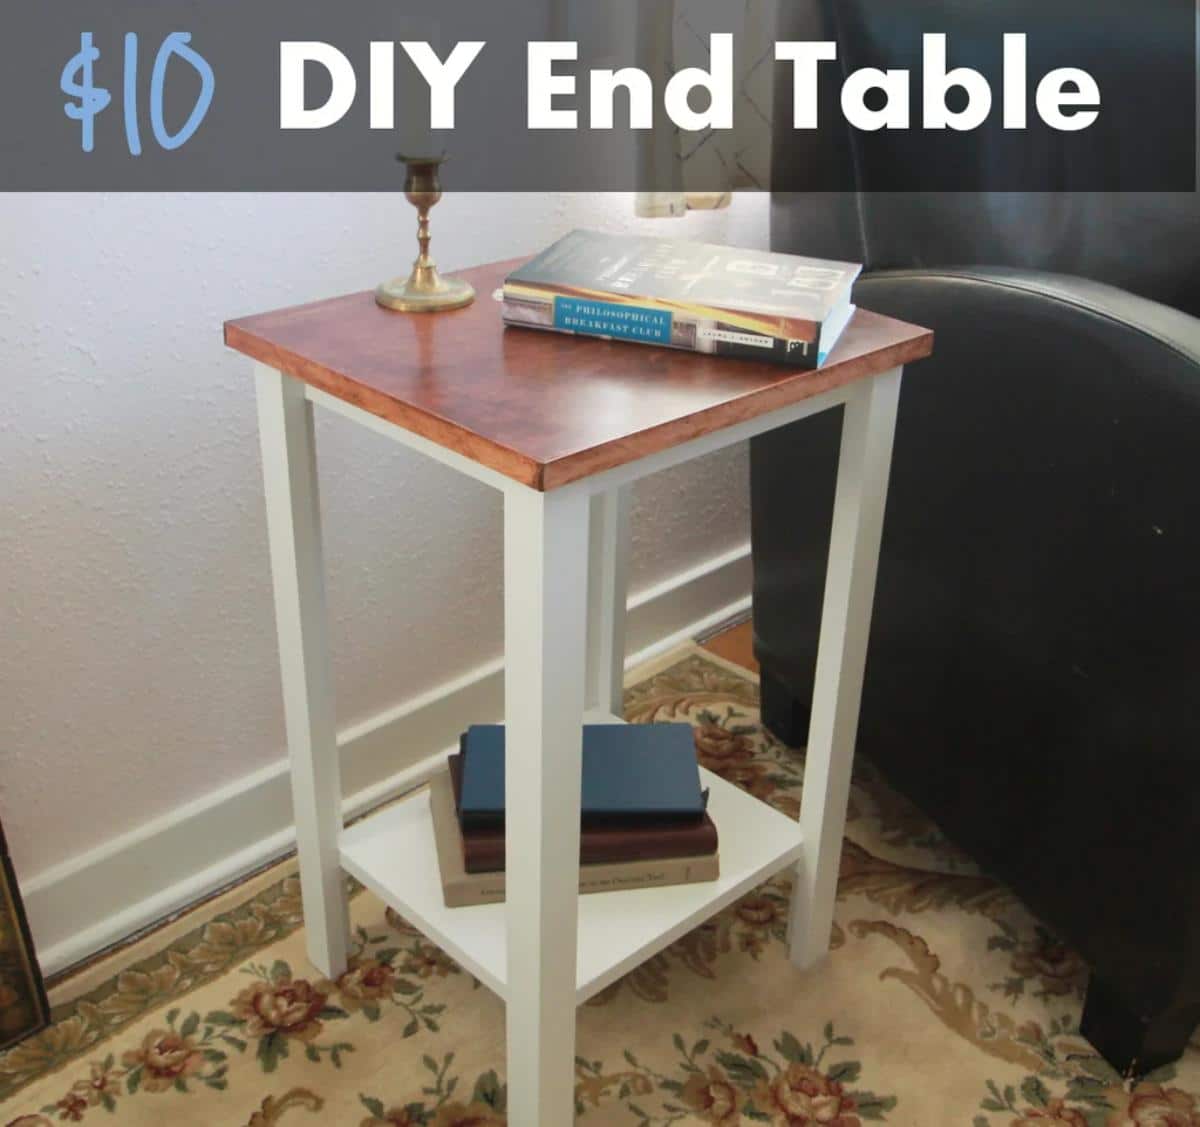 Simple DIY End Table for $10